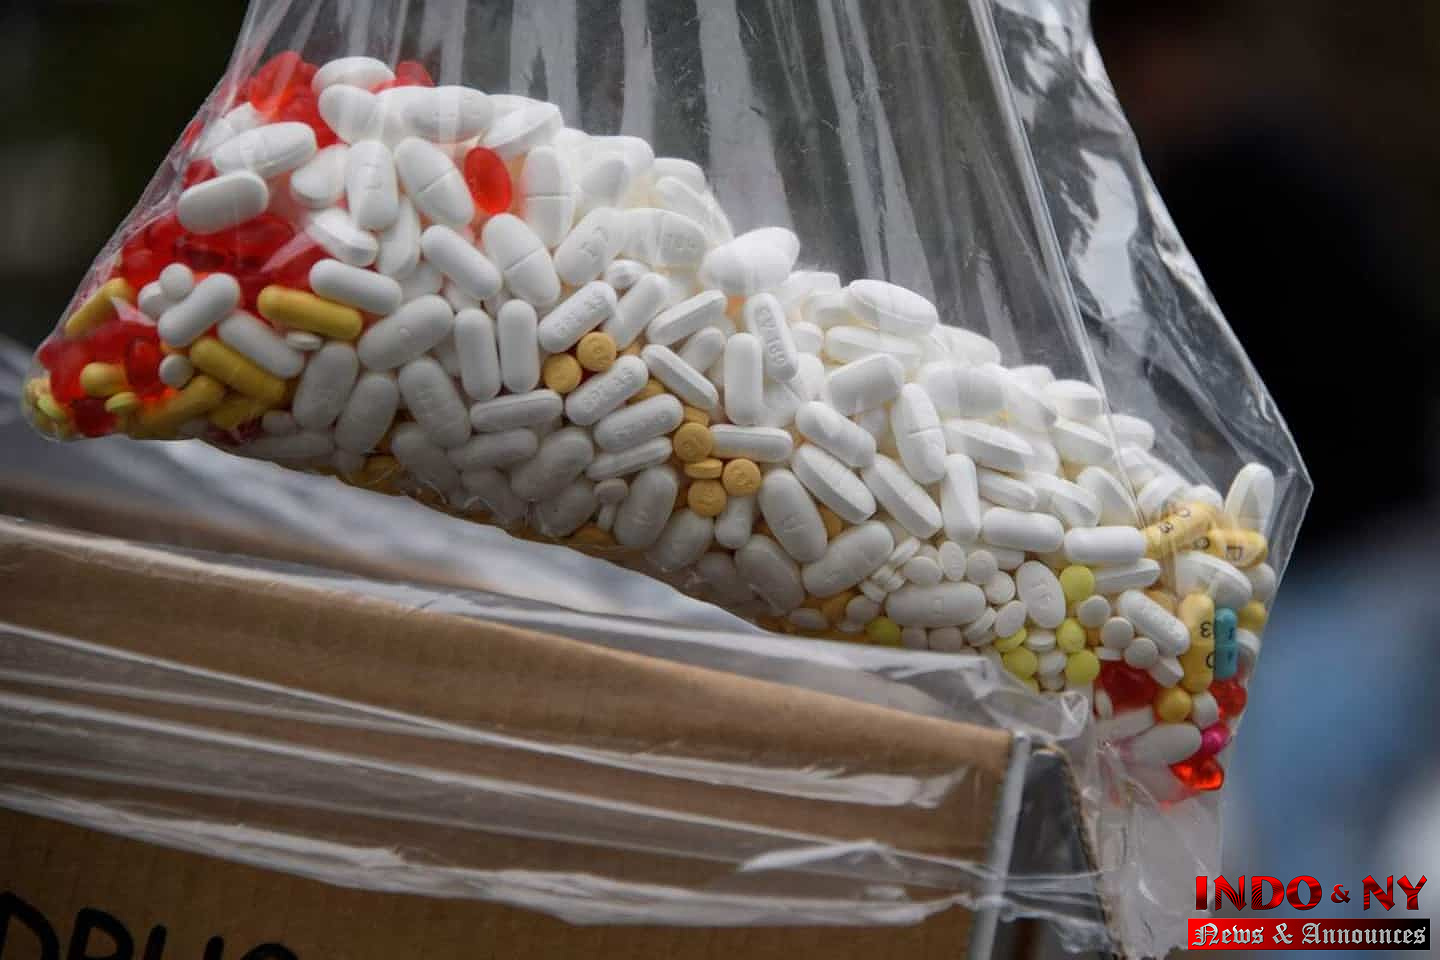 In 2021, the United States recorded a record 107,000 overdose deaths